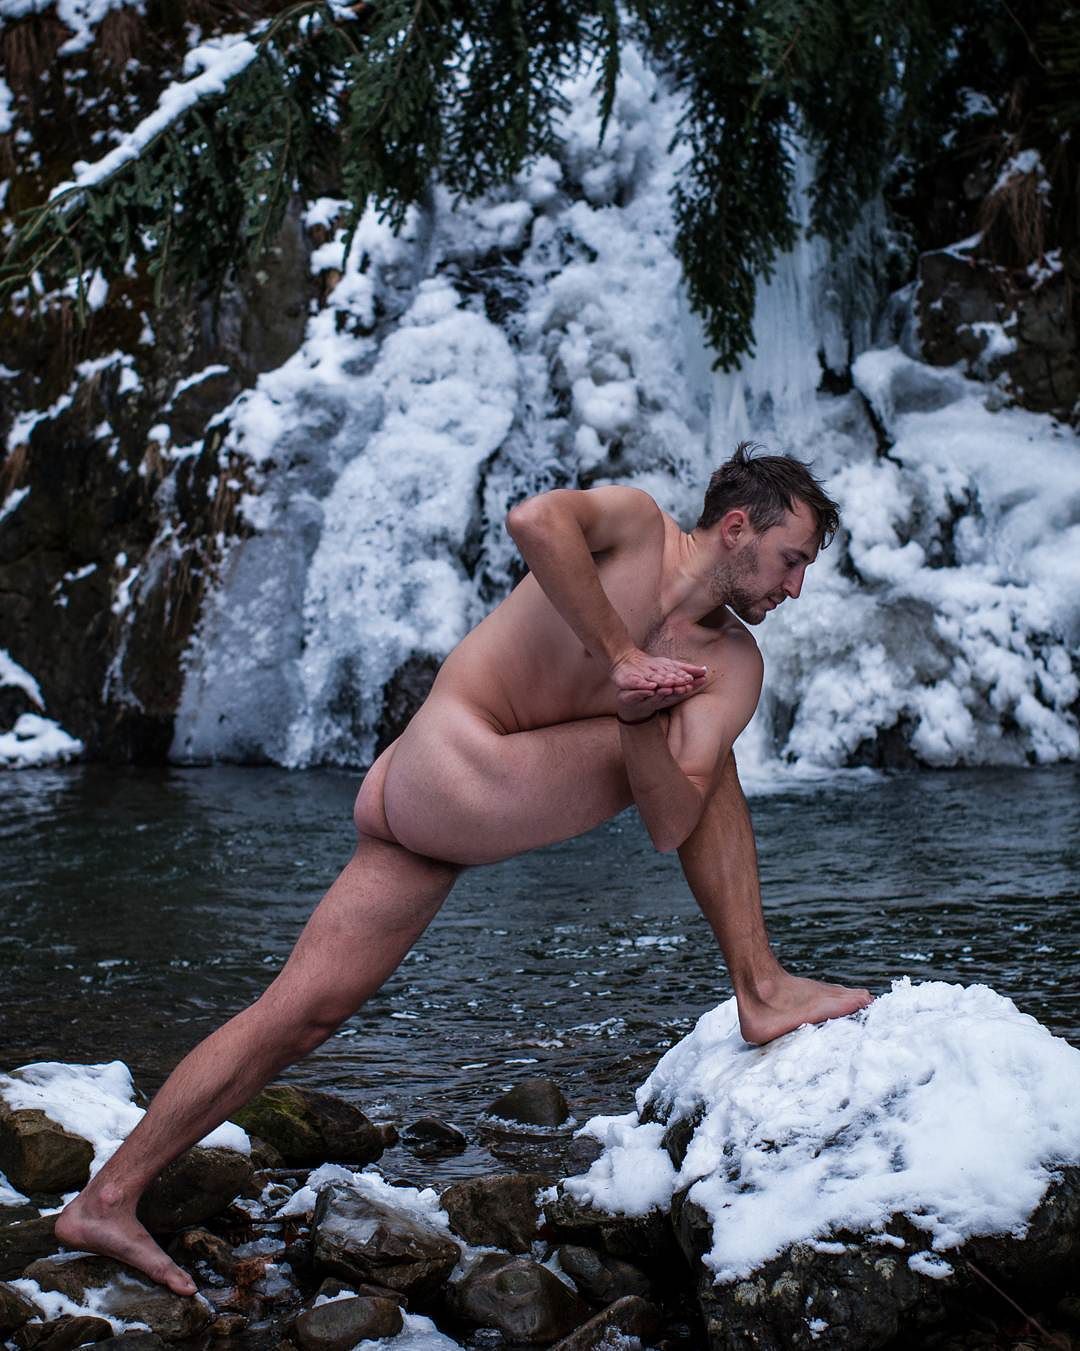 Girl Is Freezing While Posing Nude In The Snow